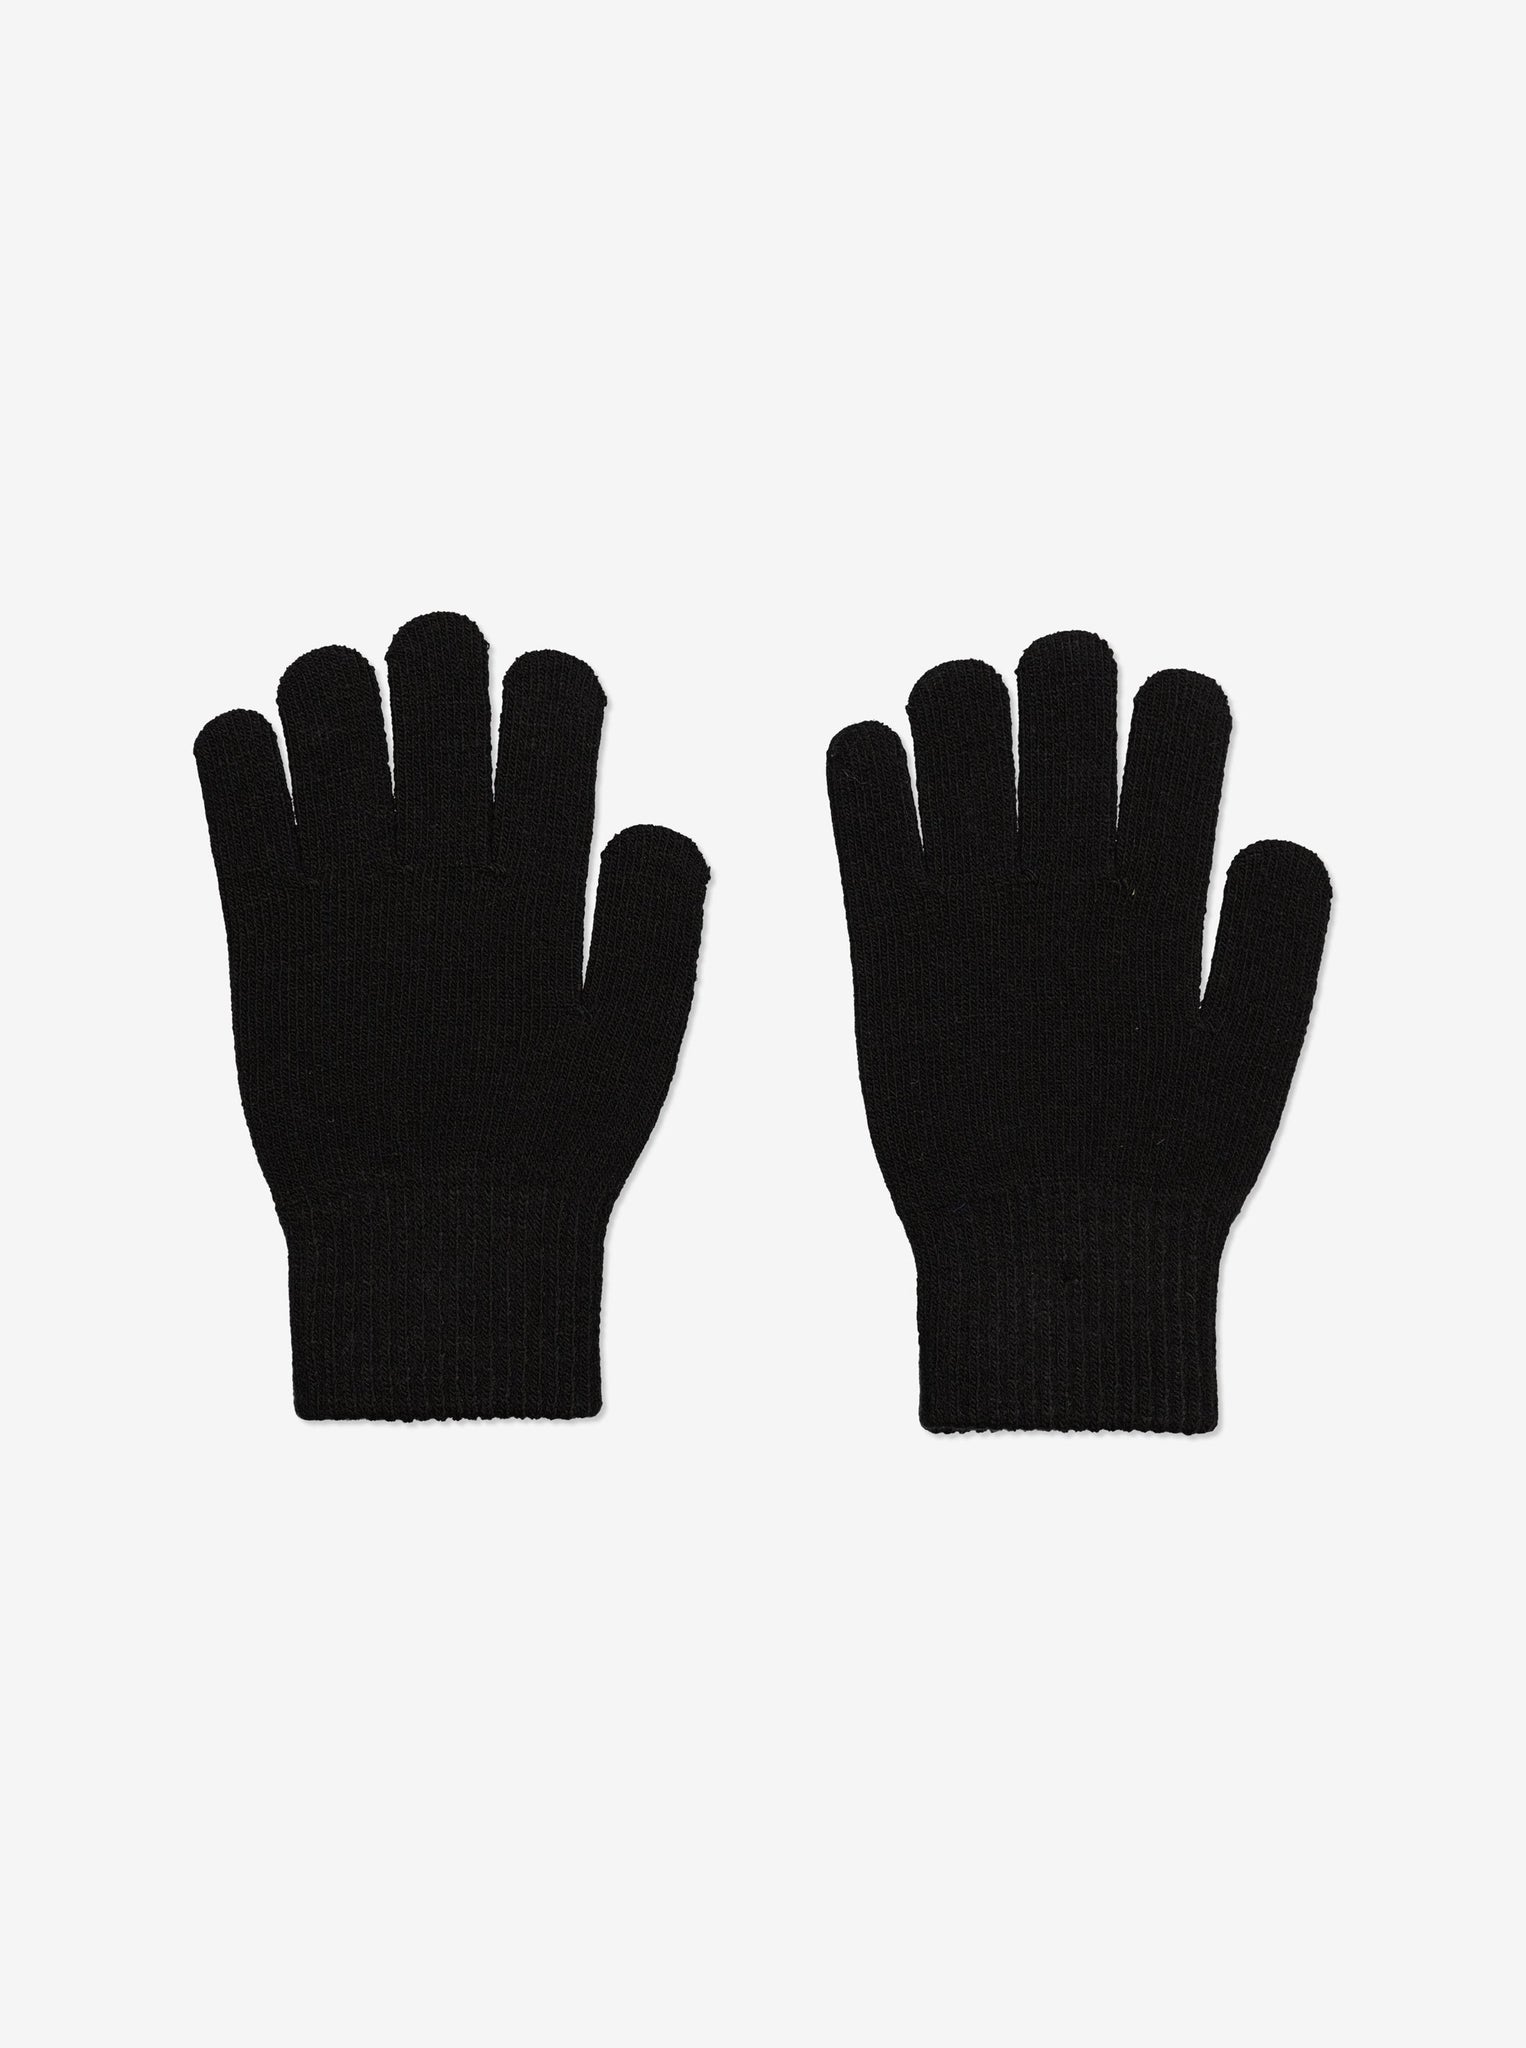 Black Magic Kids Gloves Multipack from the Polarn O. Pyret kidswear collection. Ethically produced outerwear.